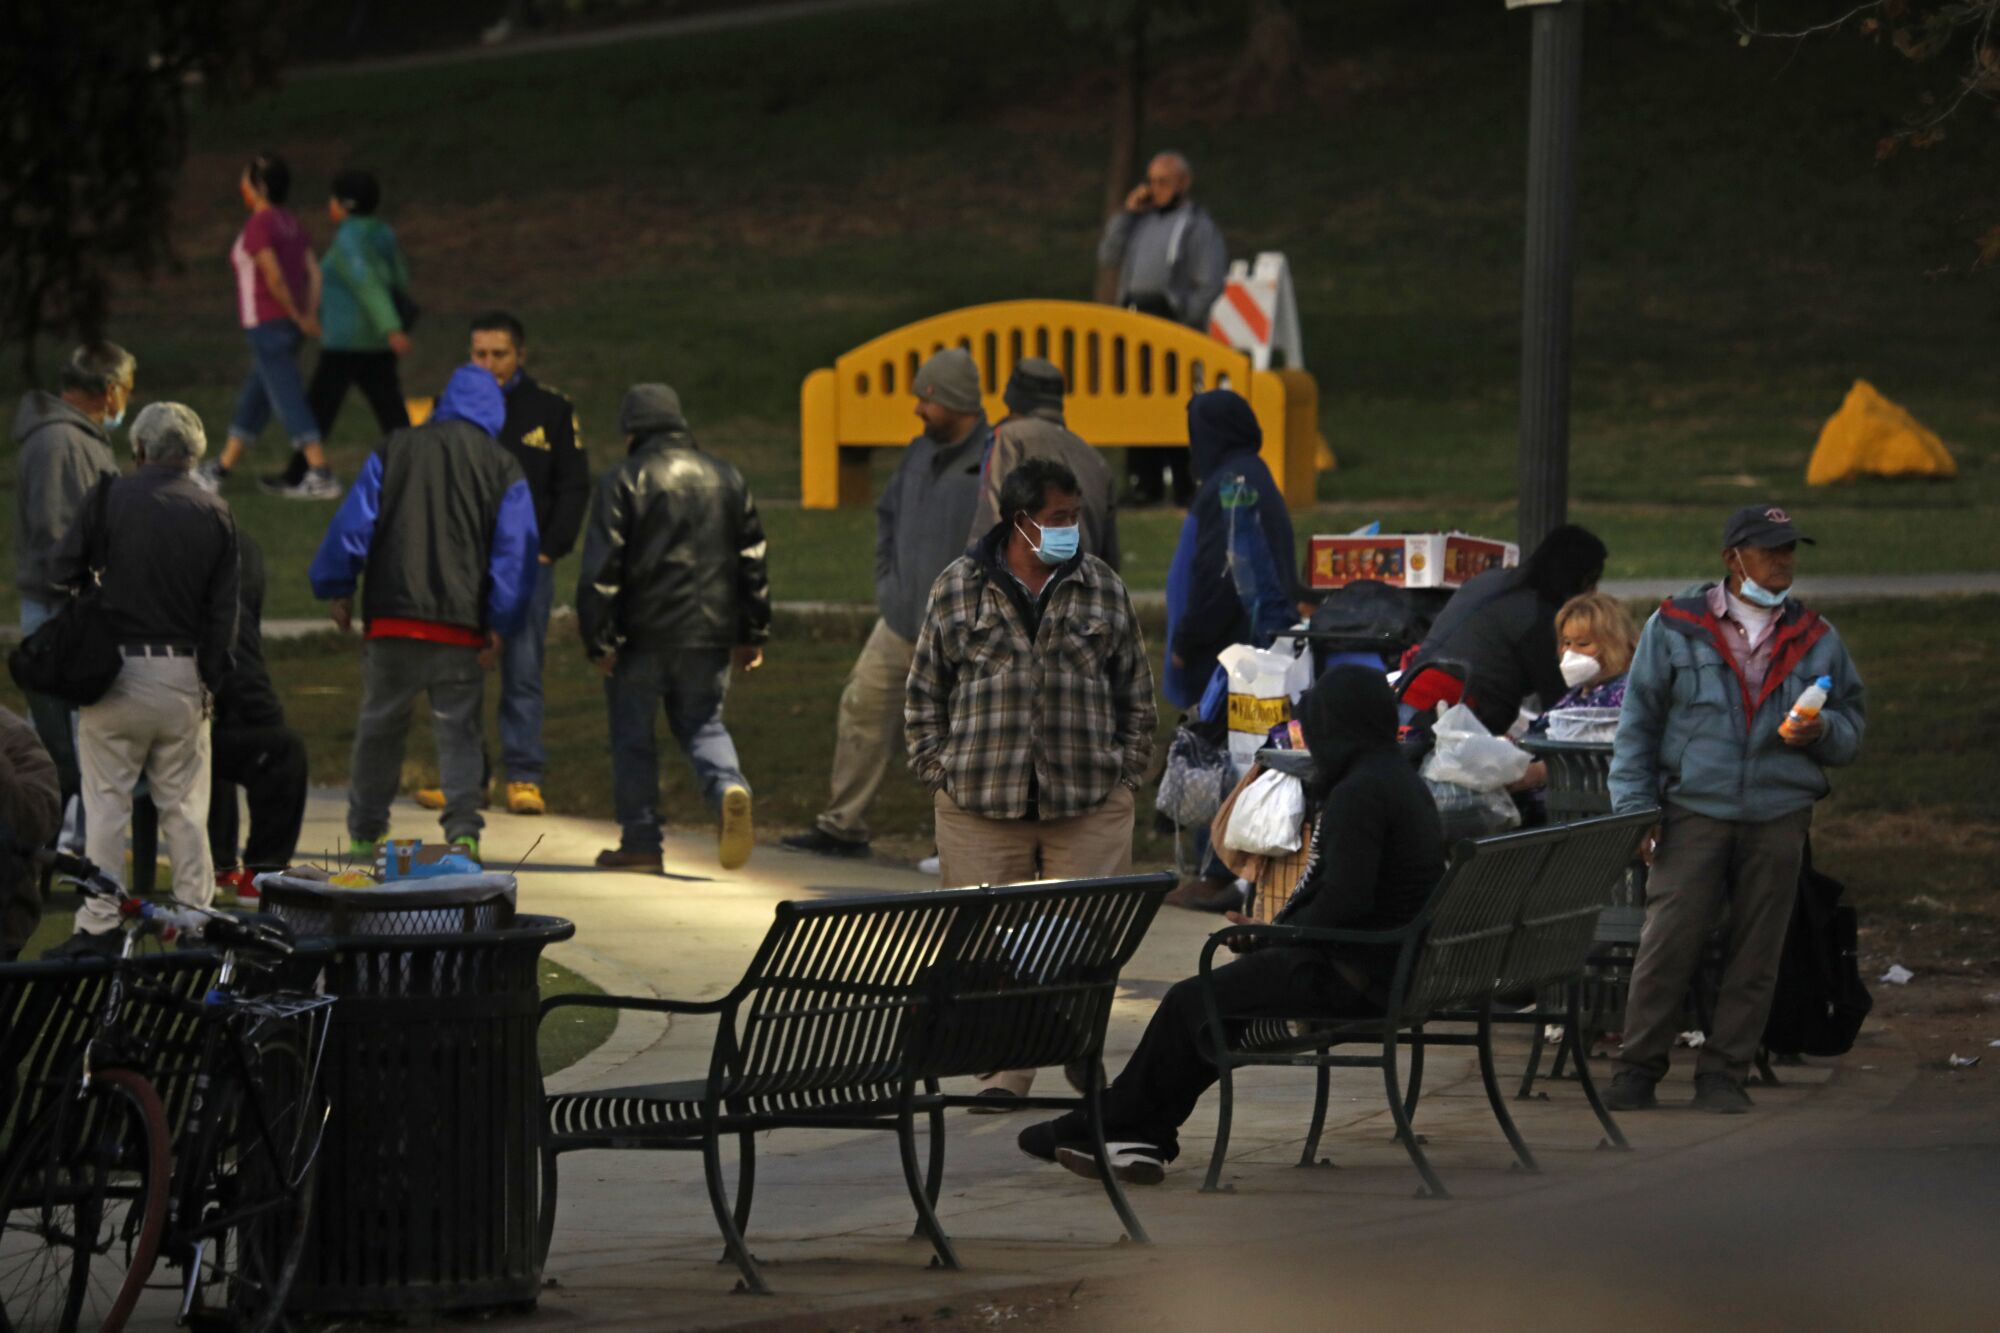 A crowd of people gathers on benches and a sidewalk under street lights at a park.